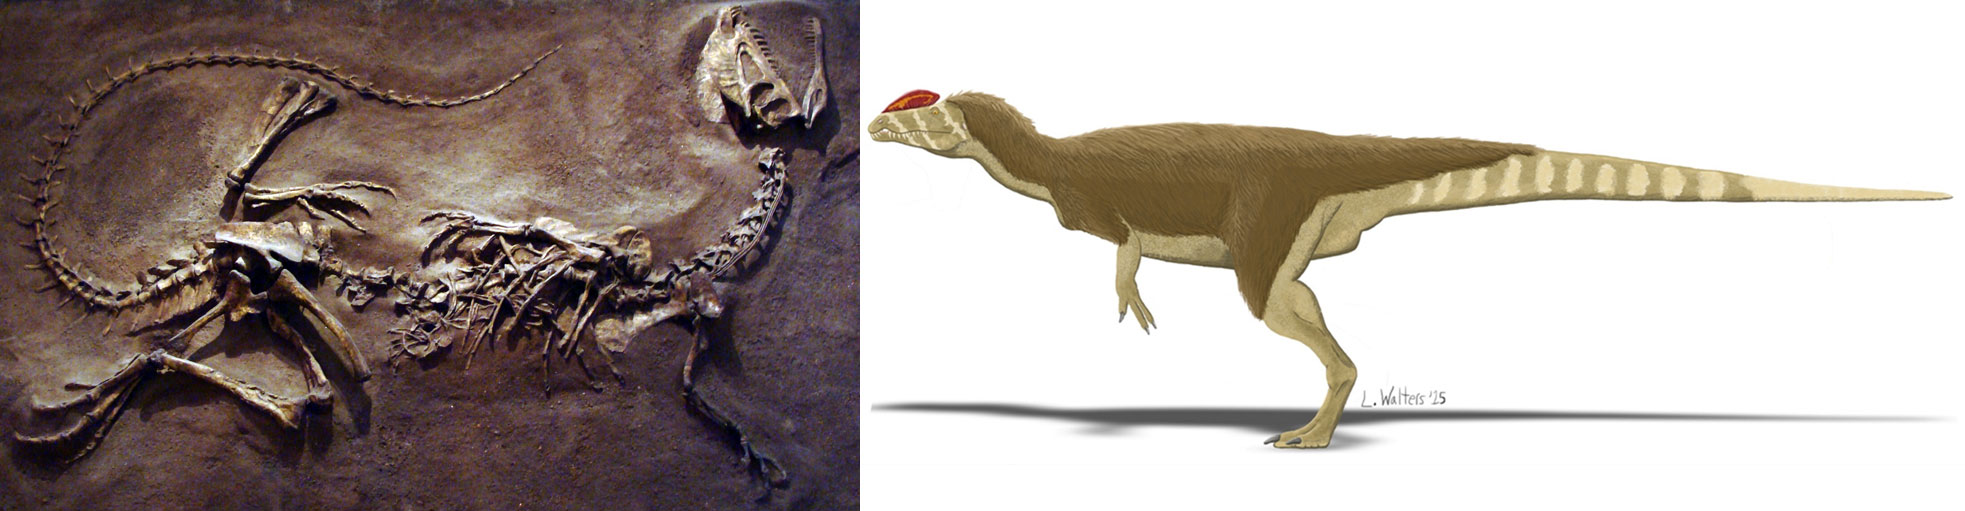 2-panel image of Dilophosaurus, a predatory dinosaur from the Jurassic. Panel 1: Photo of a skeleton partially embedded in a matrix. The skeleton's neck is arched backward, the back legs and splayed outward, and the tail curls around the top of the skeleton. The skull has a short crest. Panel 2: Illustration of the dinosaur during life; the crest is colored red in this recreation, and the animal stands on two legs.